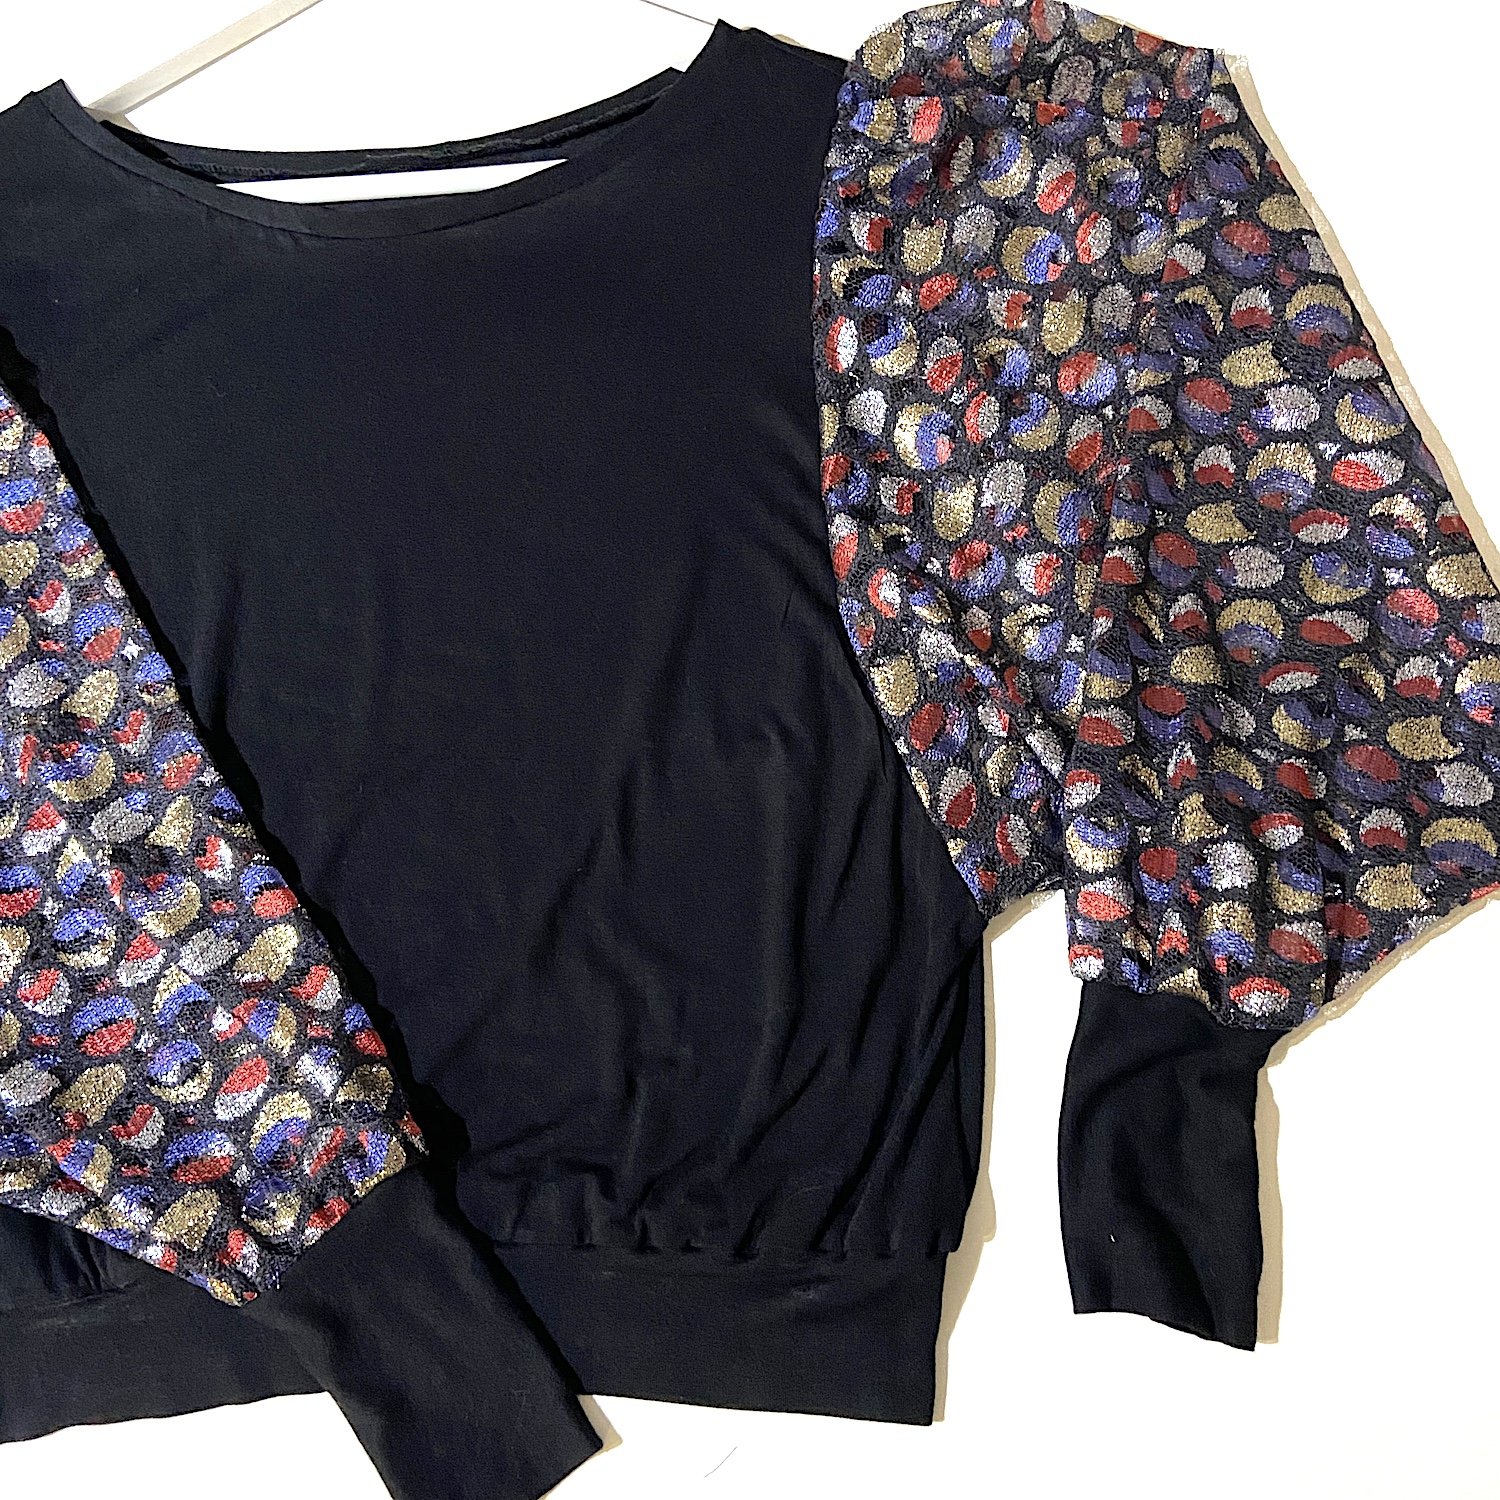 The Puff Sleeve Blouse (Copy)